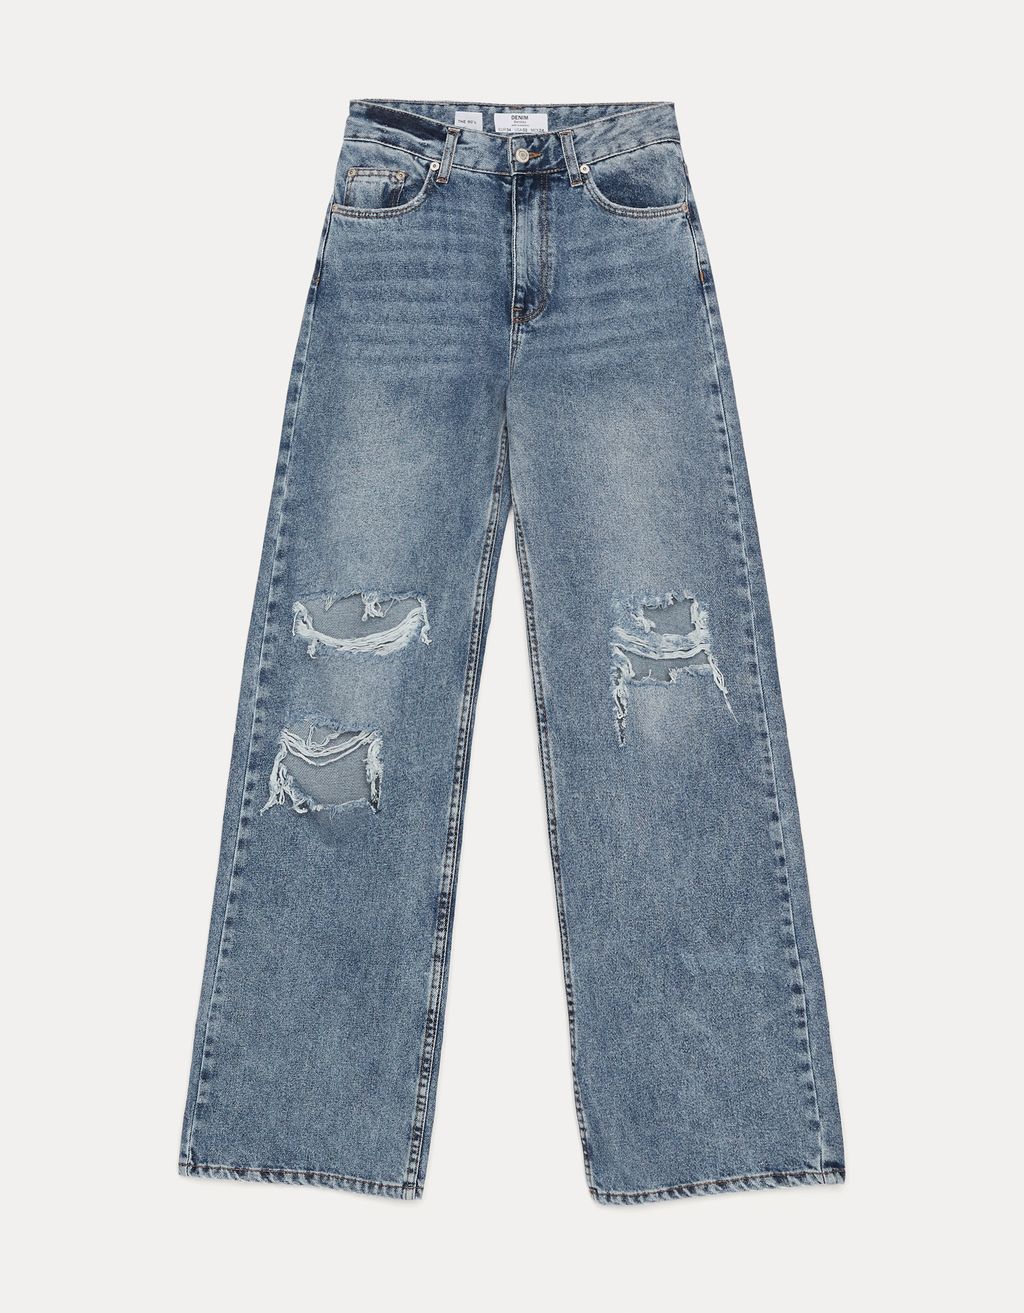 90s flare jeans